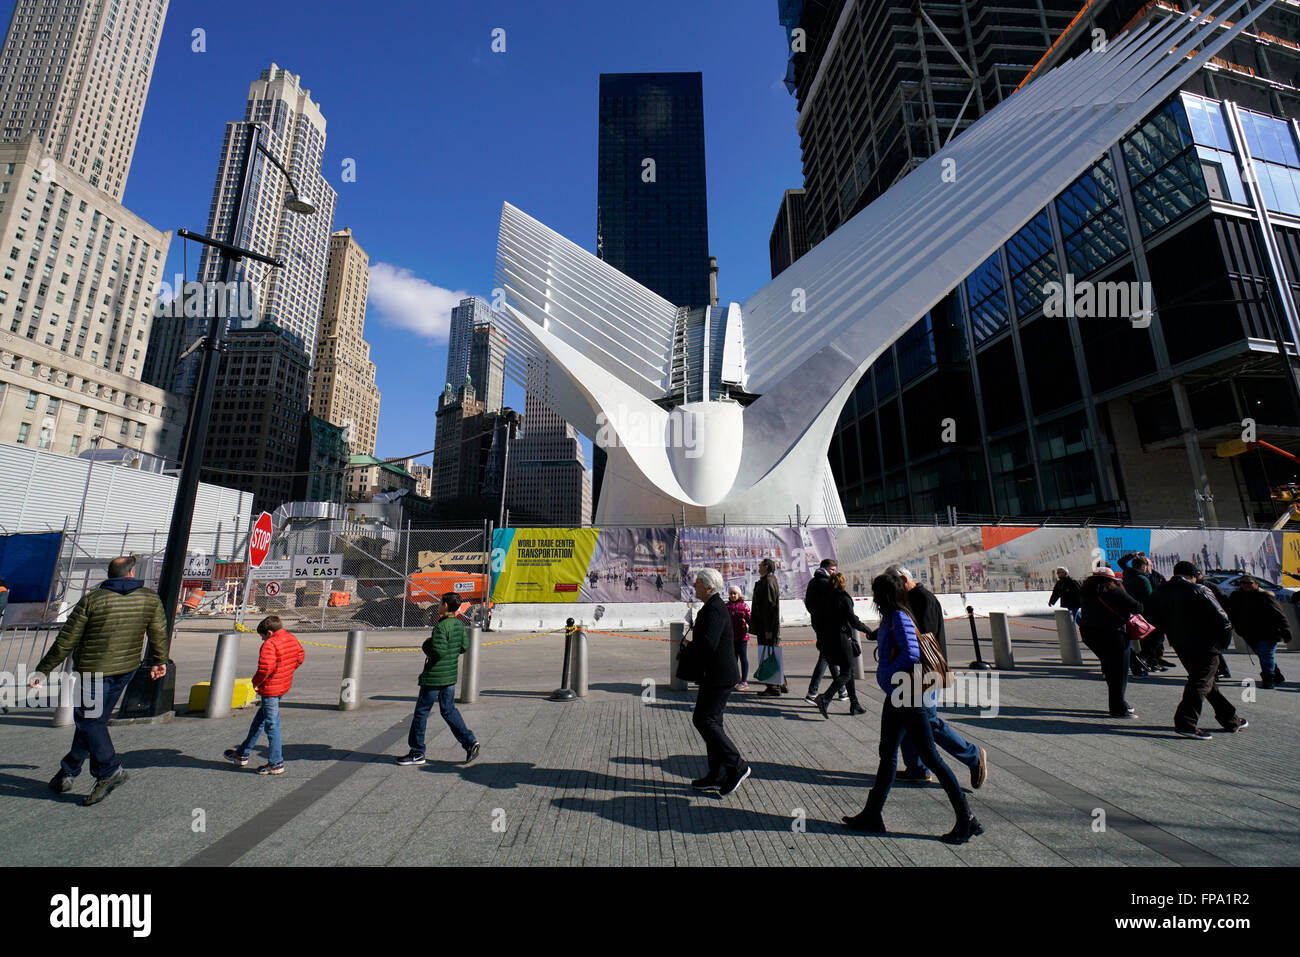 Exterior view of the Oculus the World Trade Center Transportation Hub PATH station in Lower Manhattan, New York City, USA Stock Photo